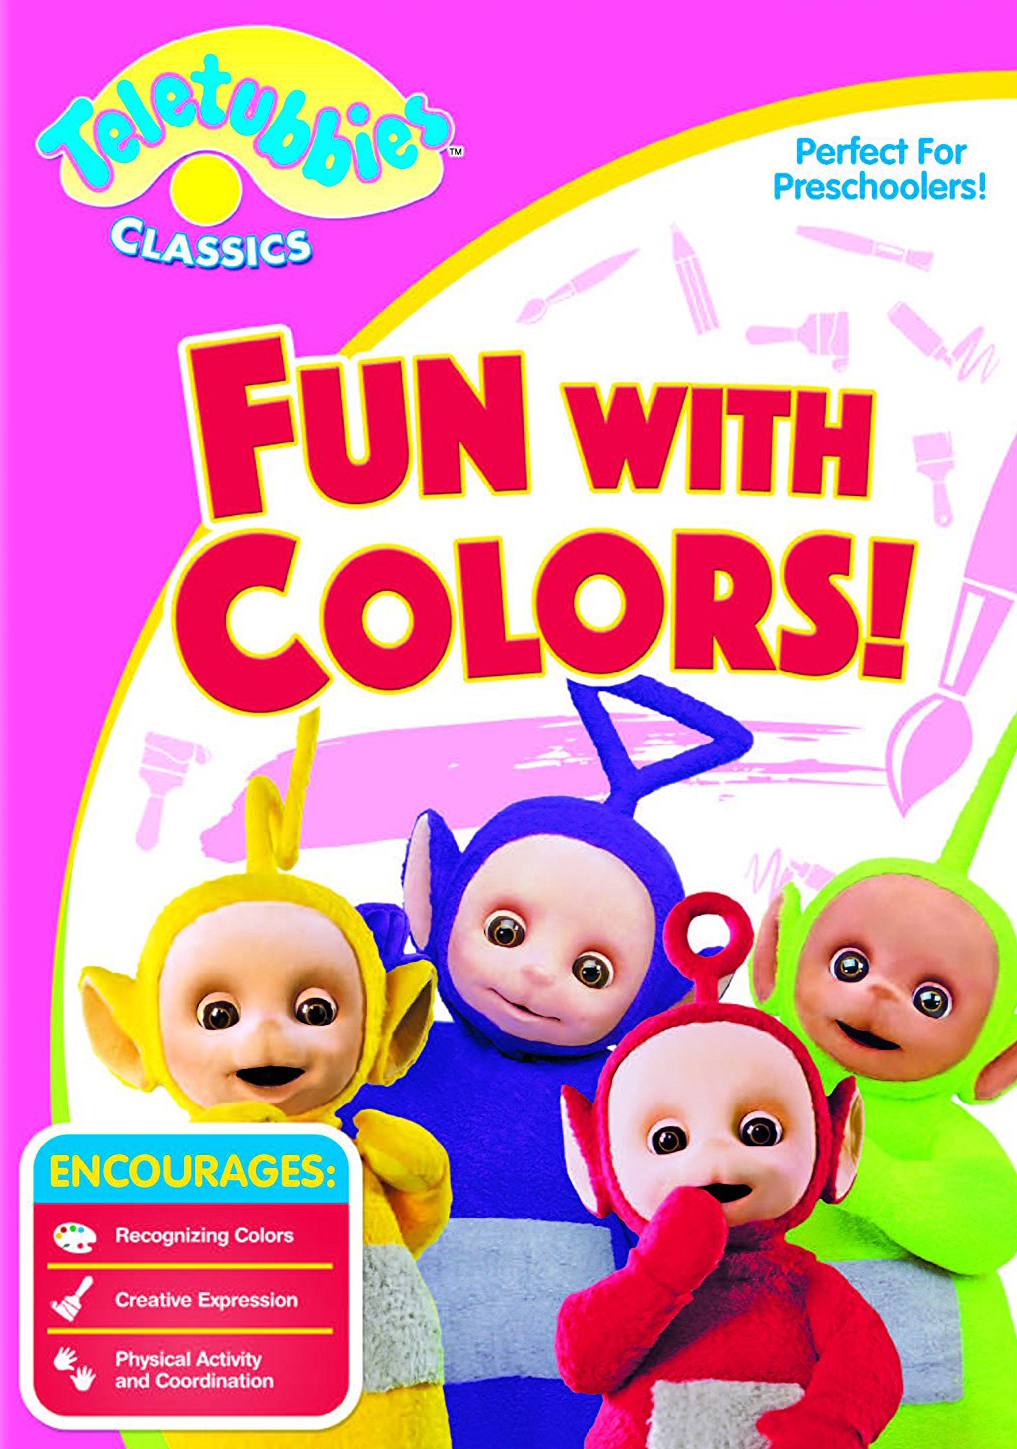 Teletubbies DVD Cover